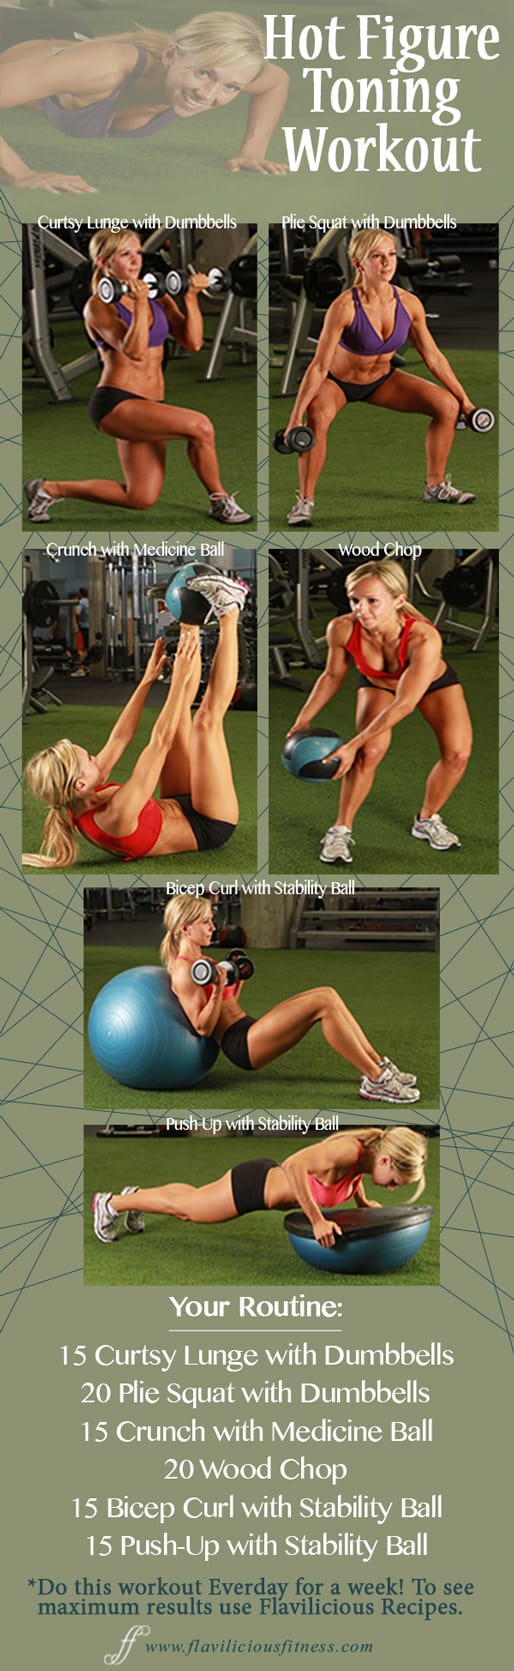 Workouts For Women's Health